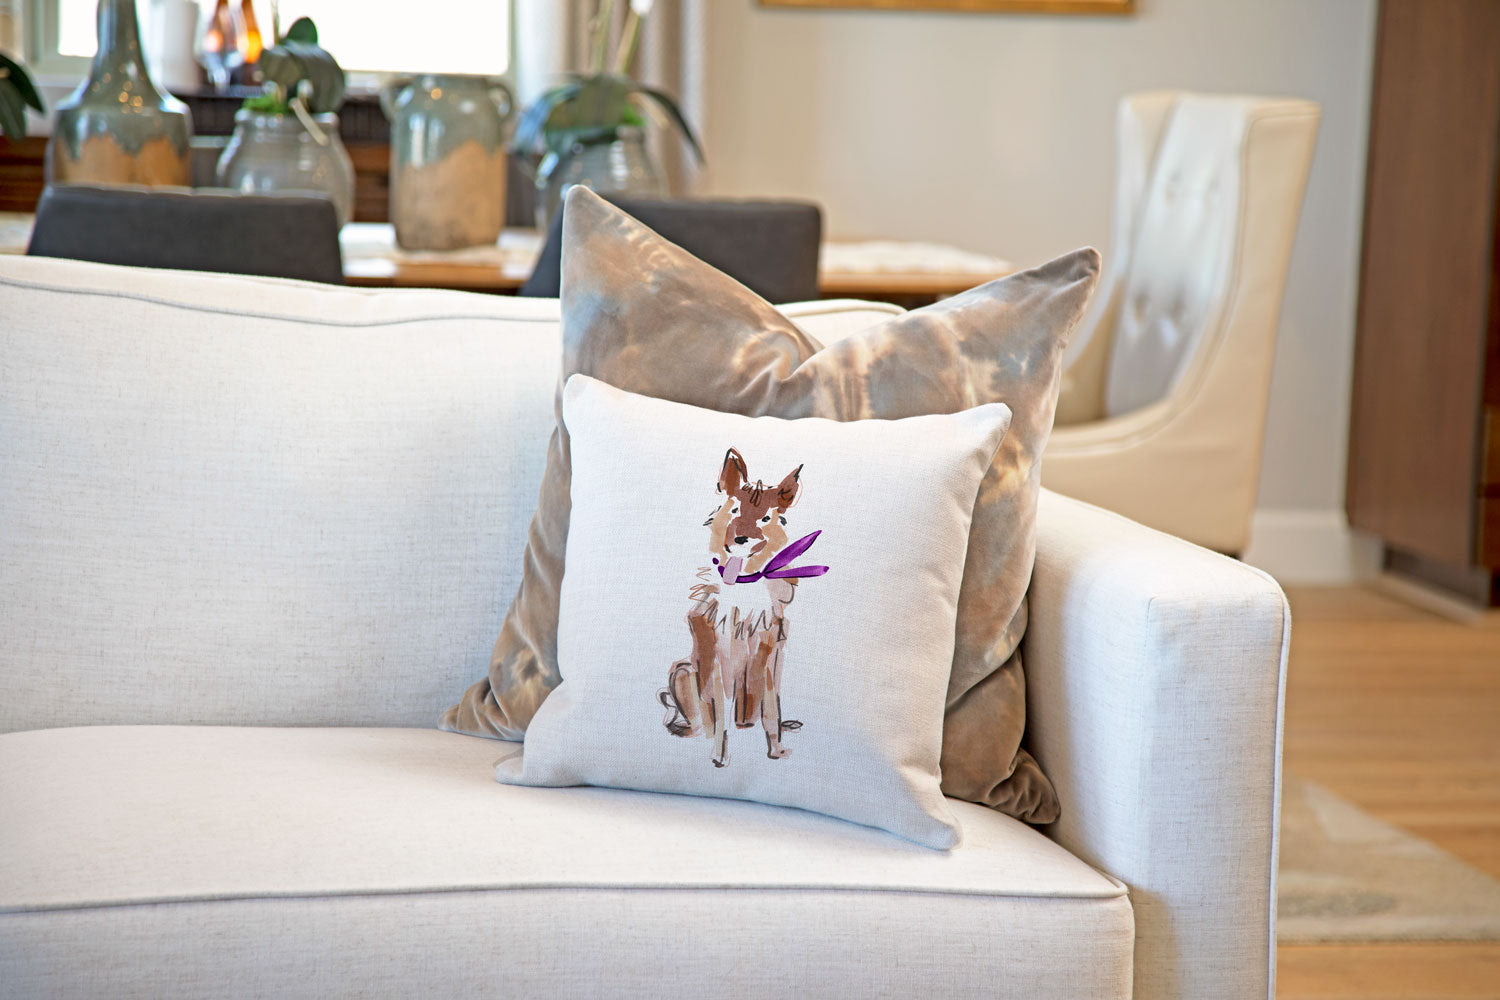 Sammy Shepard Throw Pillow Cover - Dog Illustration Throw Pillow Cover Collection-Di Lewis